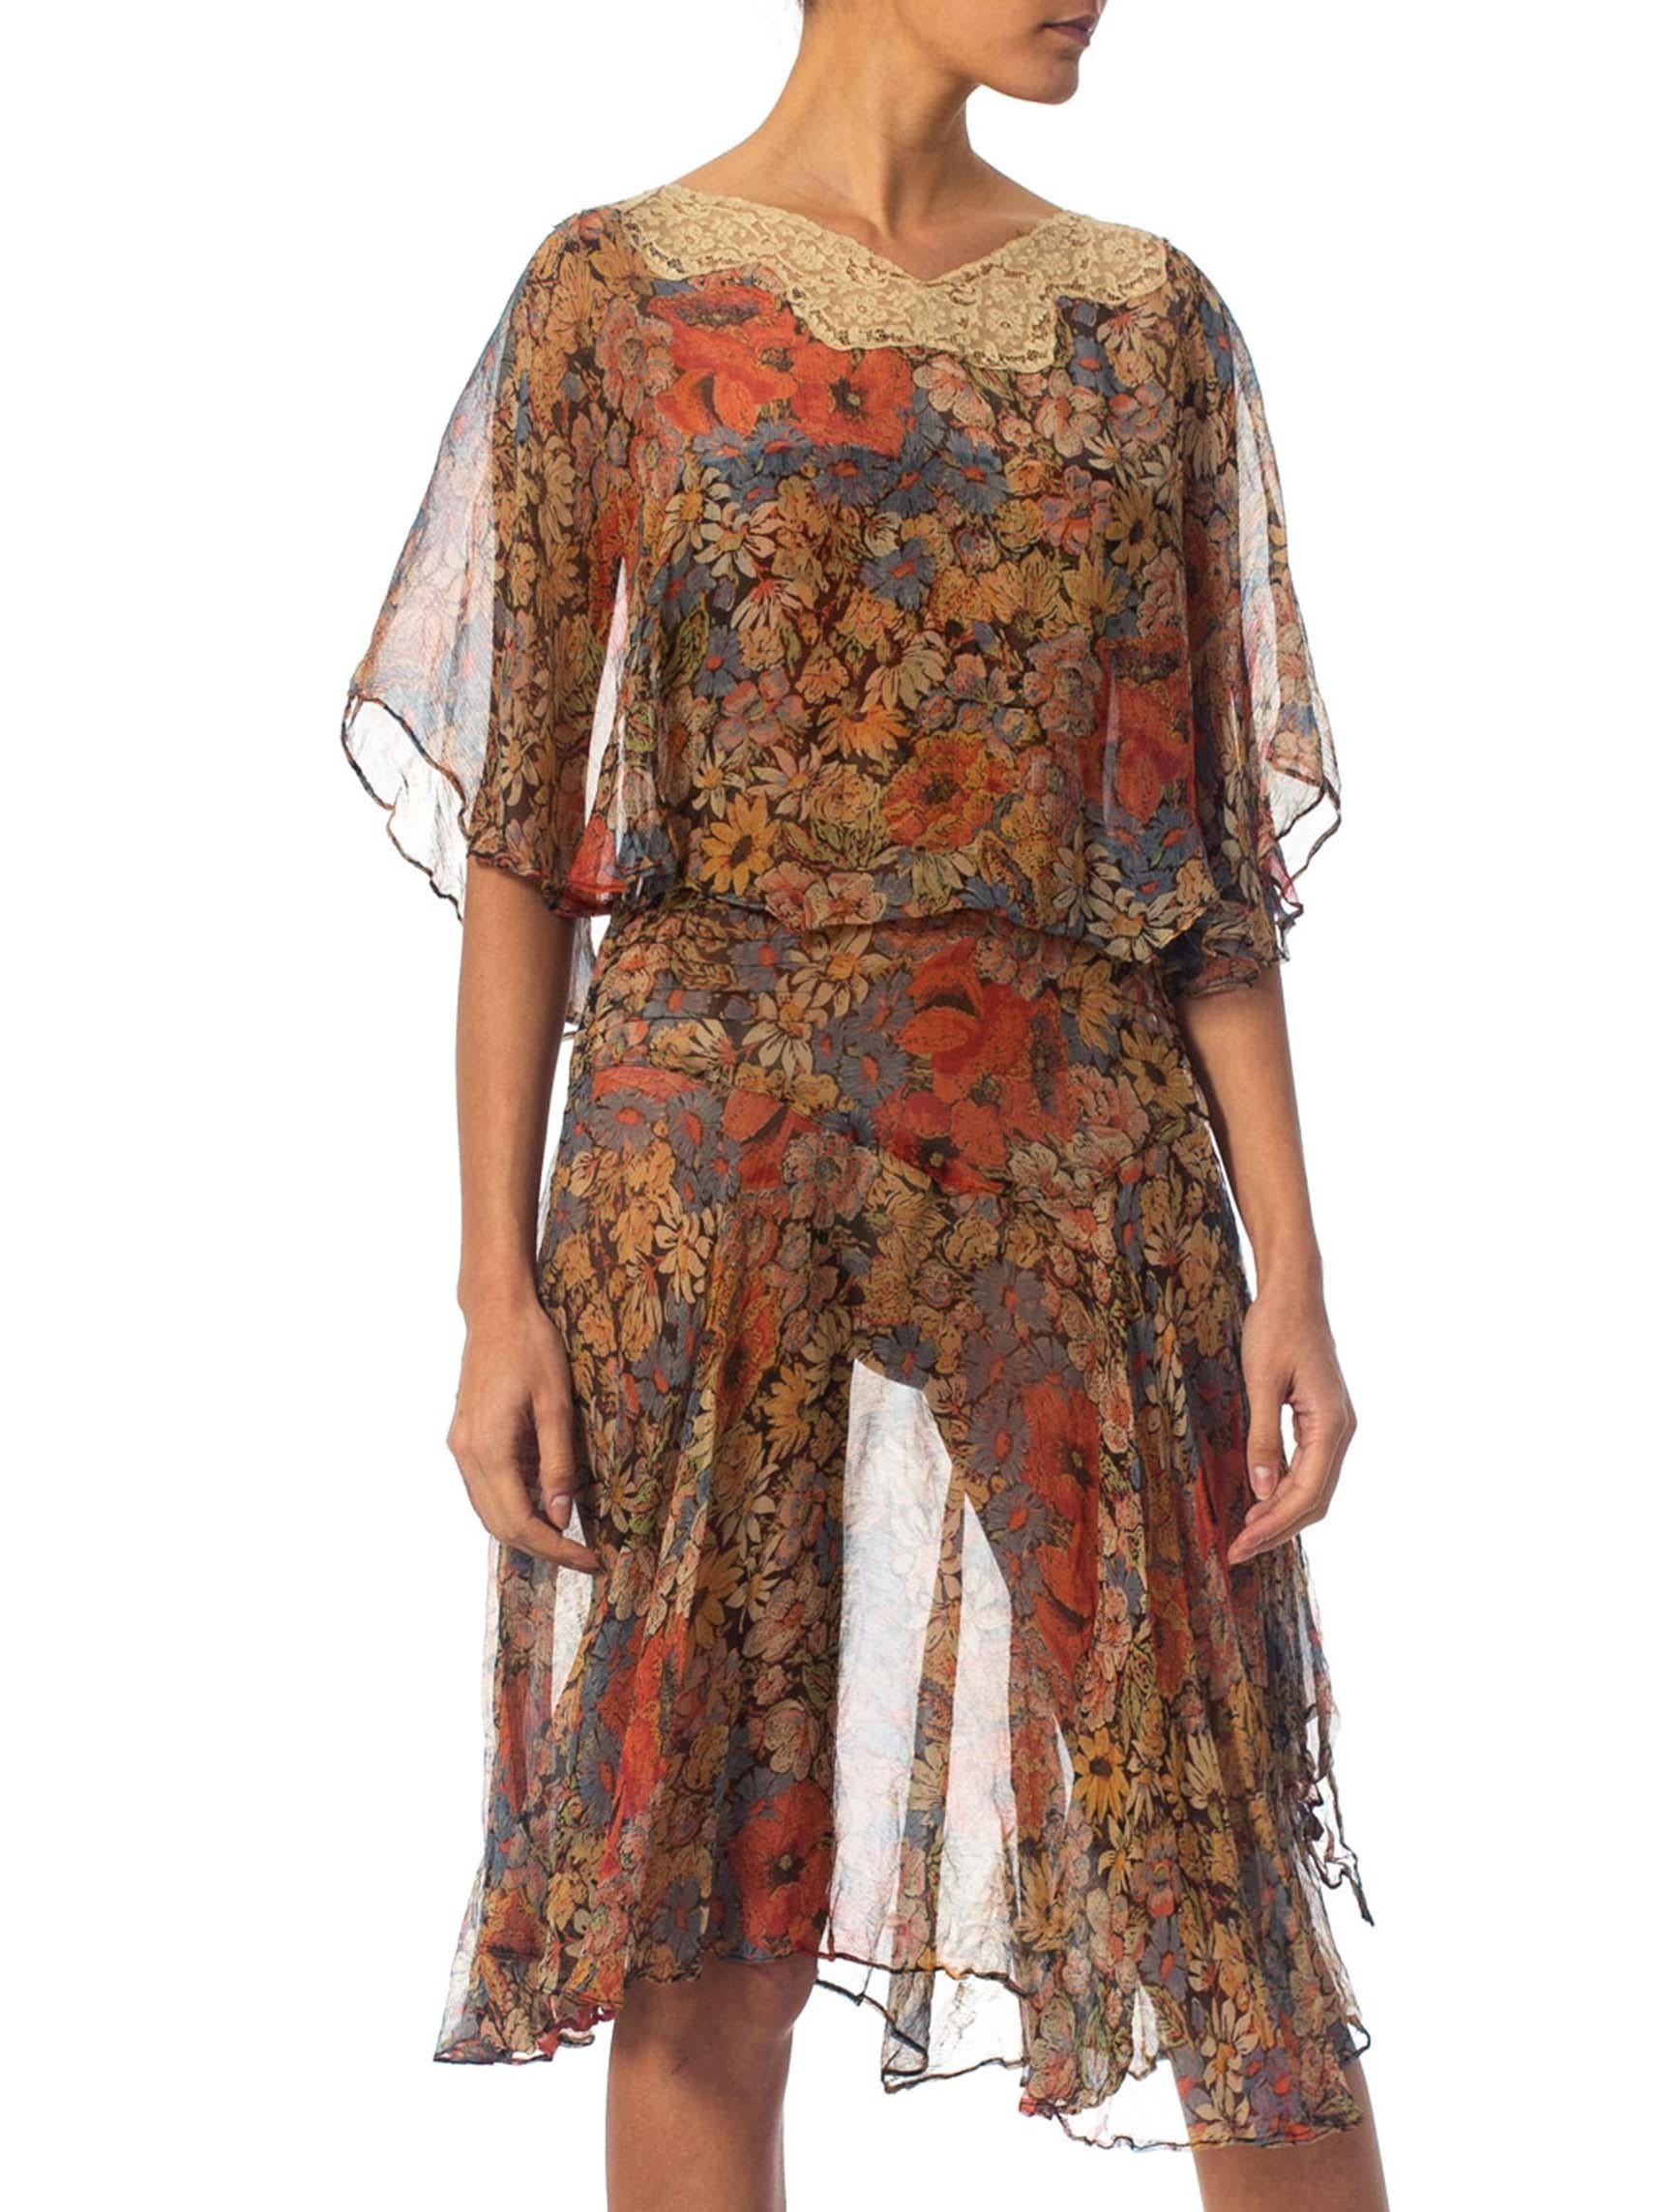 Women's 1920S Earth Tone Floral Silk Mousseline Dress With Lace Collar & Caped Bodice For Sale